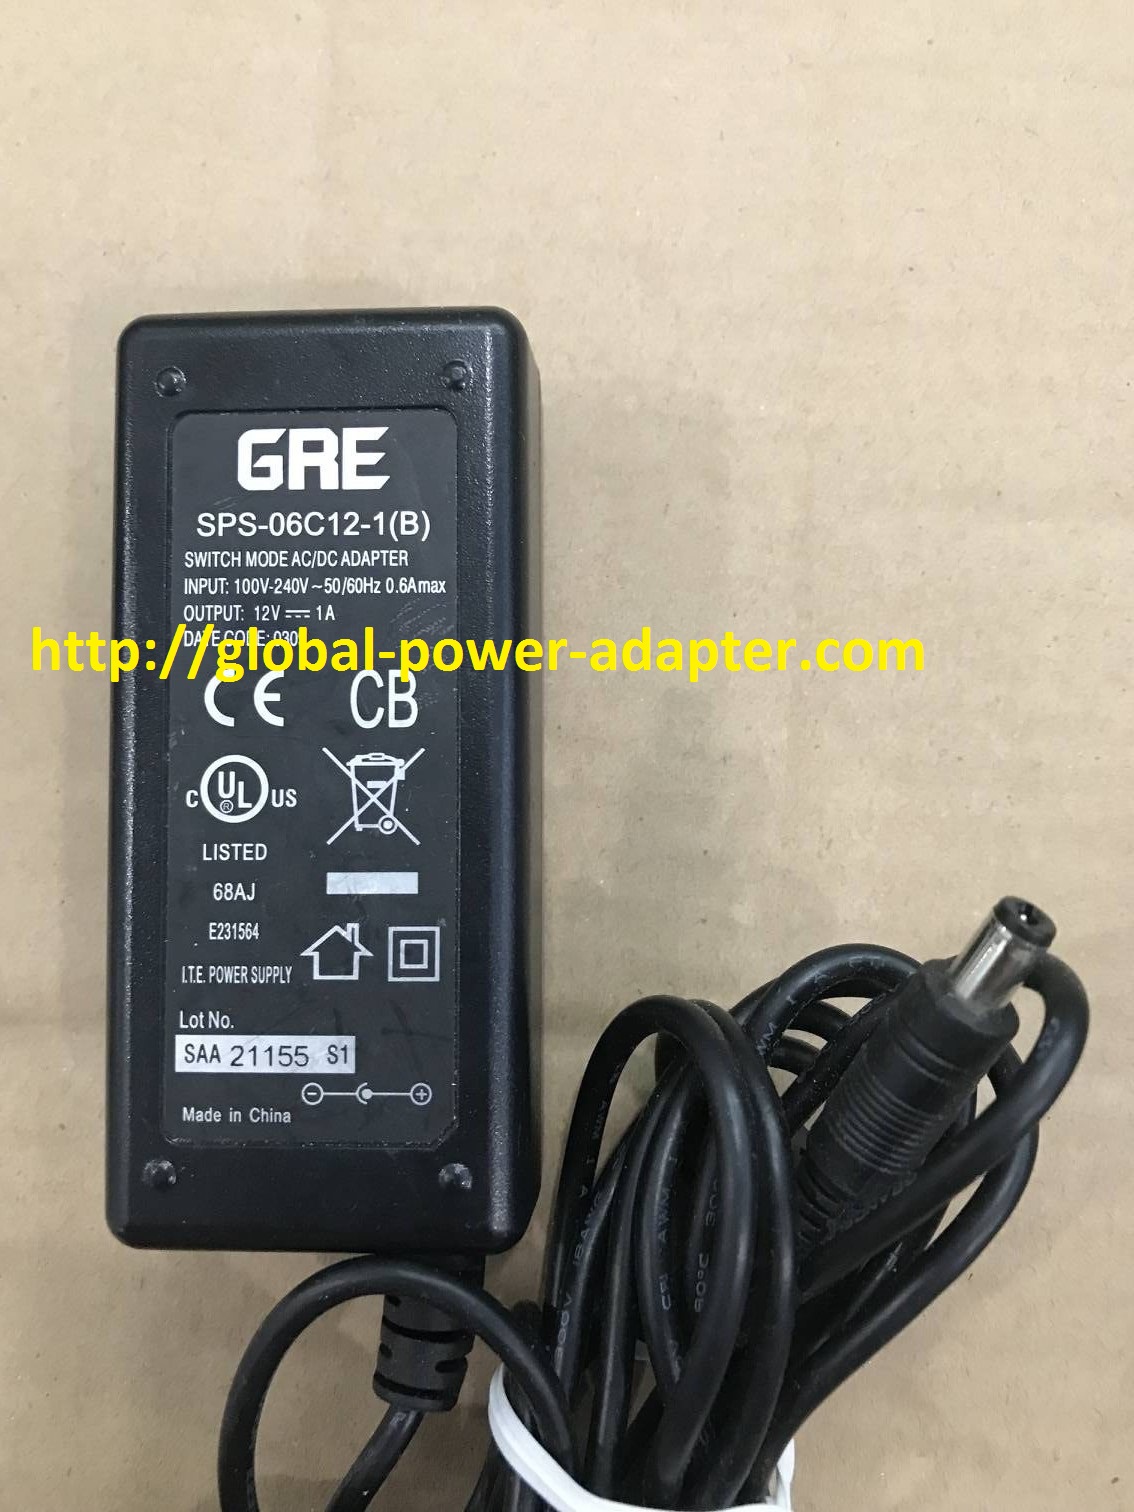 NEW GRE SPS-06C12-1(B) AC DC Adapter POWER SUPPLY